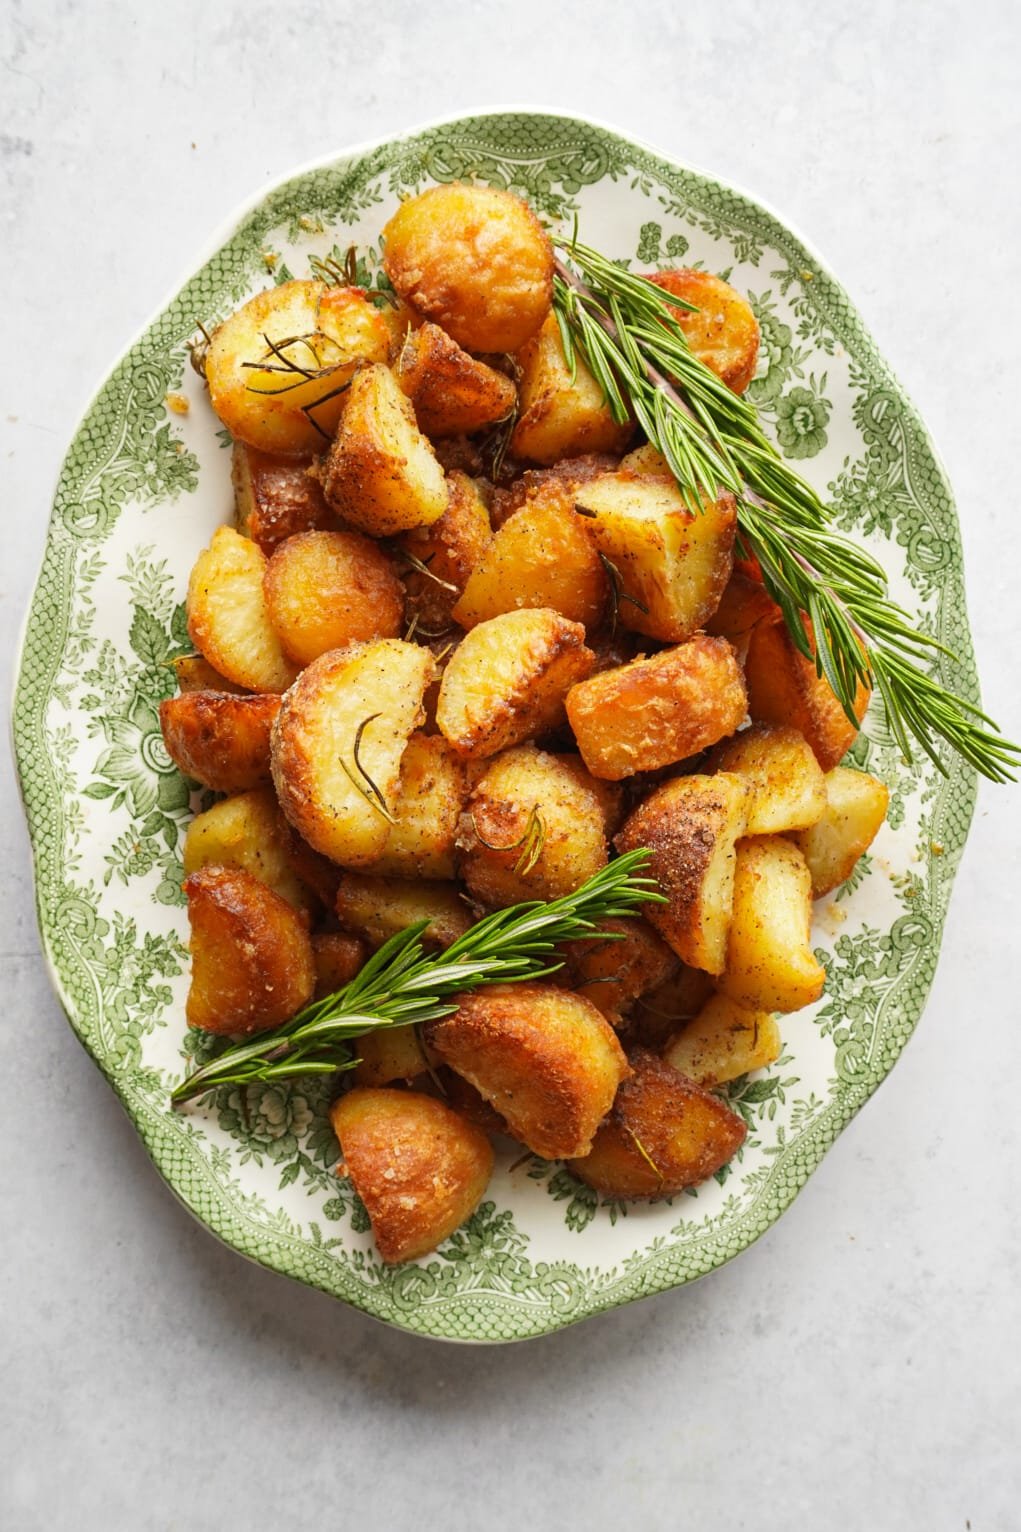 perfectly baked potato pieces that are golden and crispy with fresh rosemary